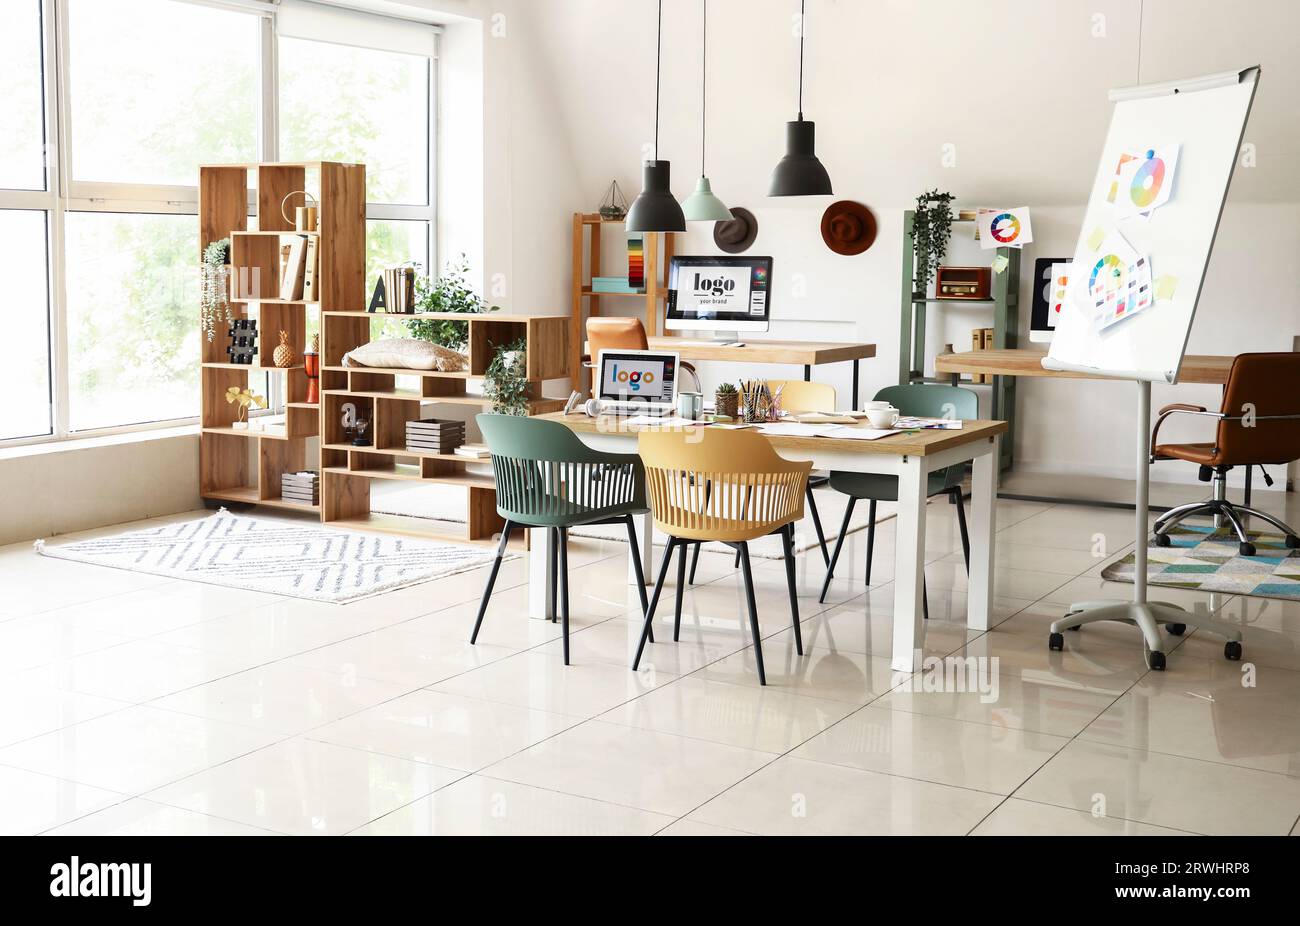 Interior of office with graphic designer's workplaces Stock Photo